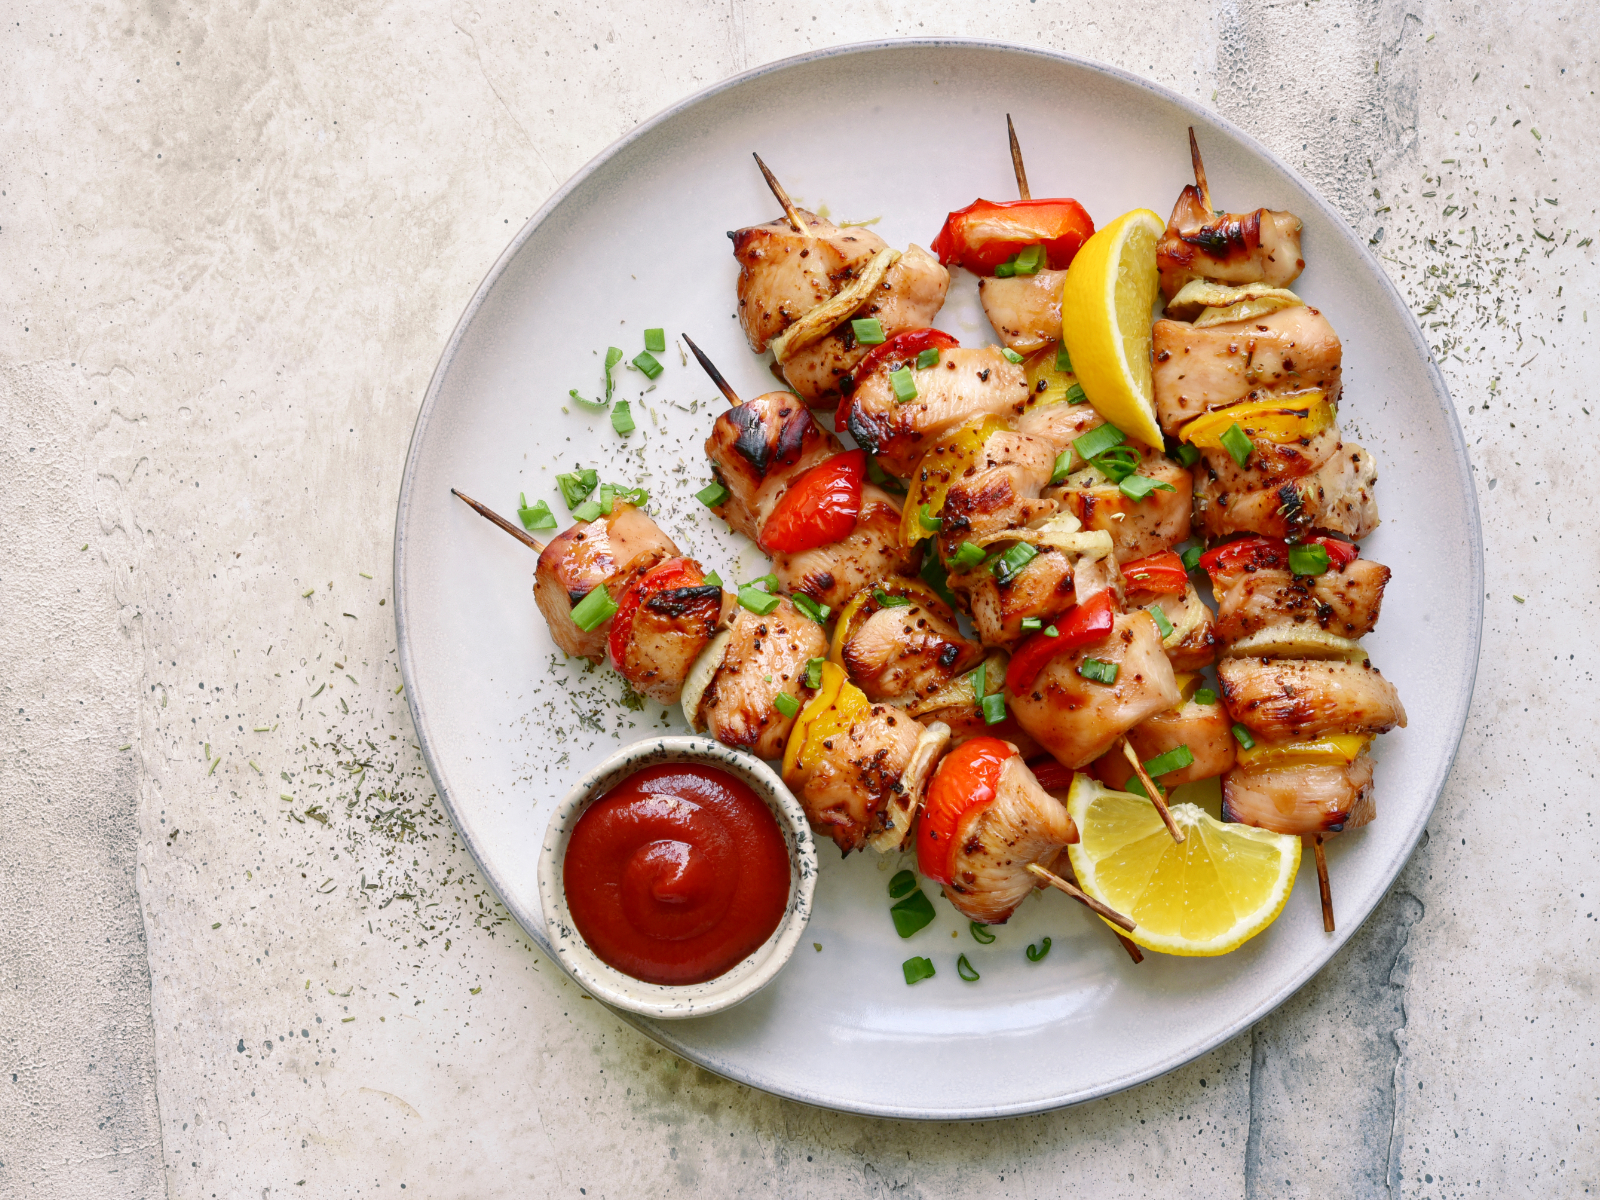 chicken and vegetable skewers with lemon wedges and a side of ketchup